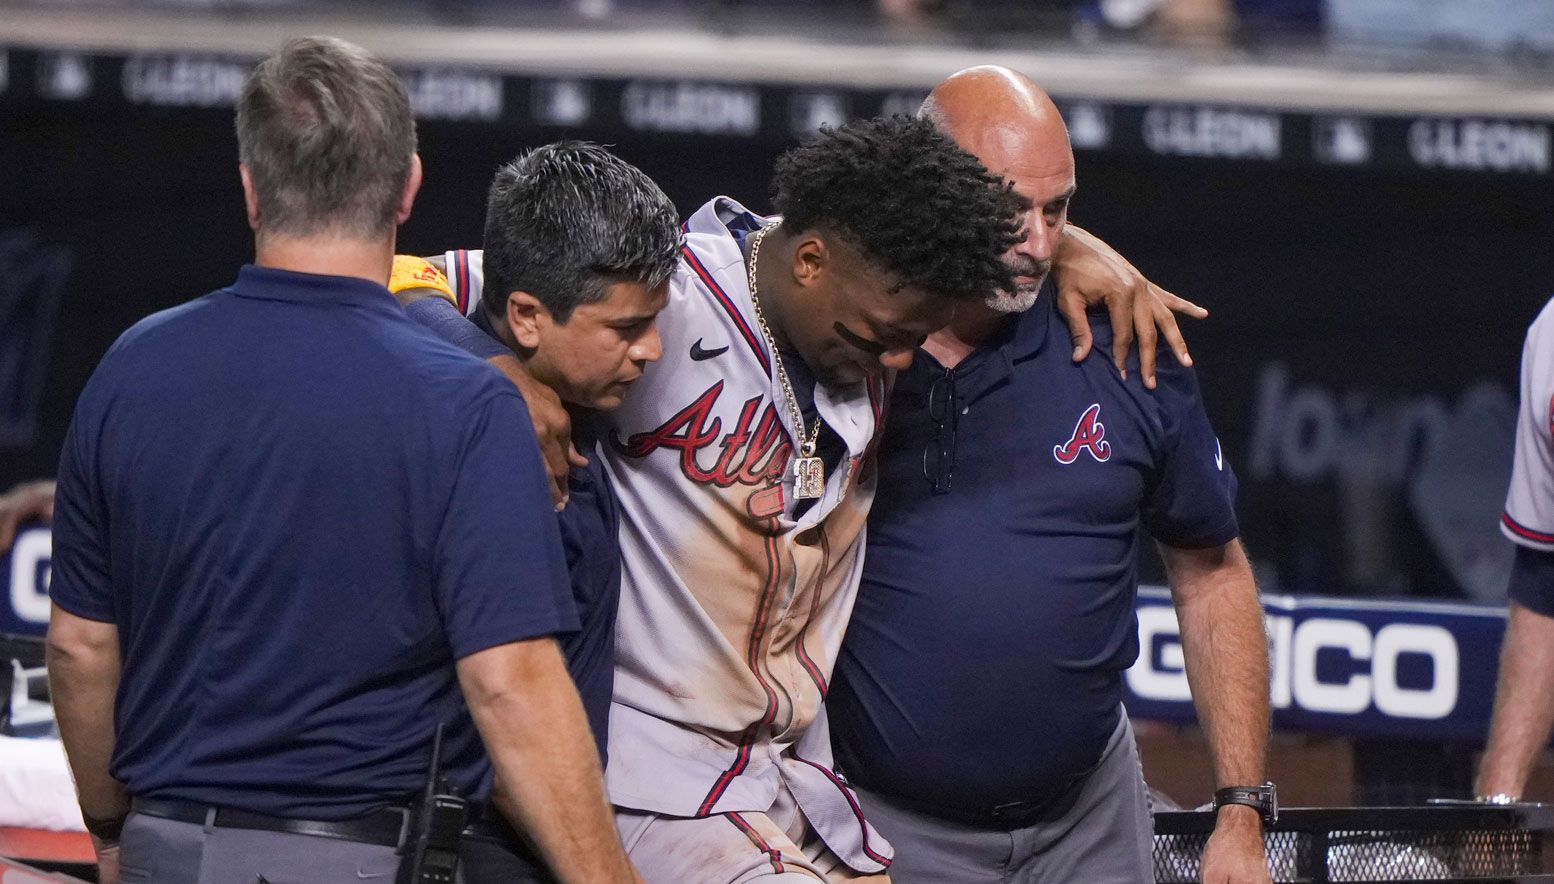 Ronald Acuna carried off the field from injury